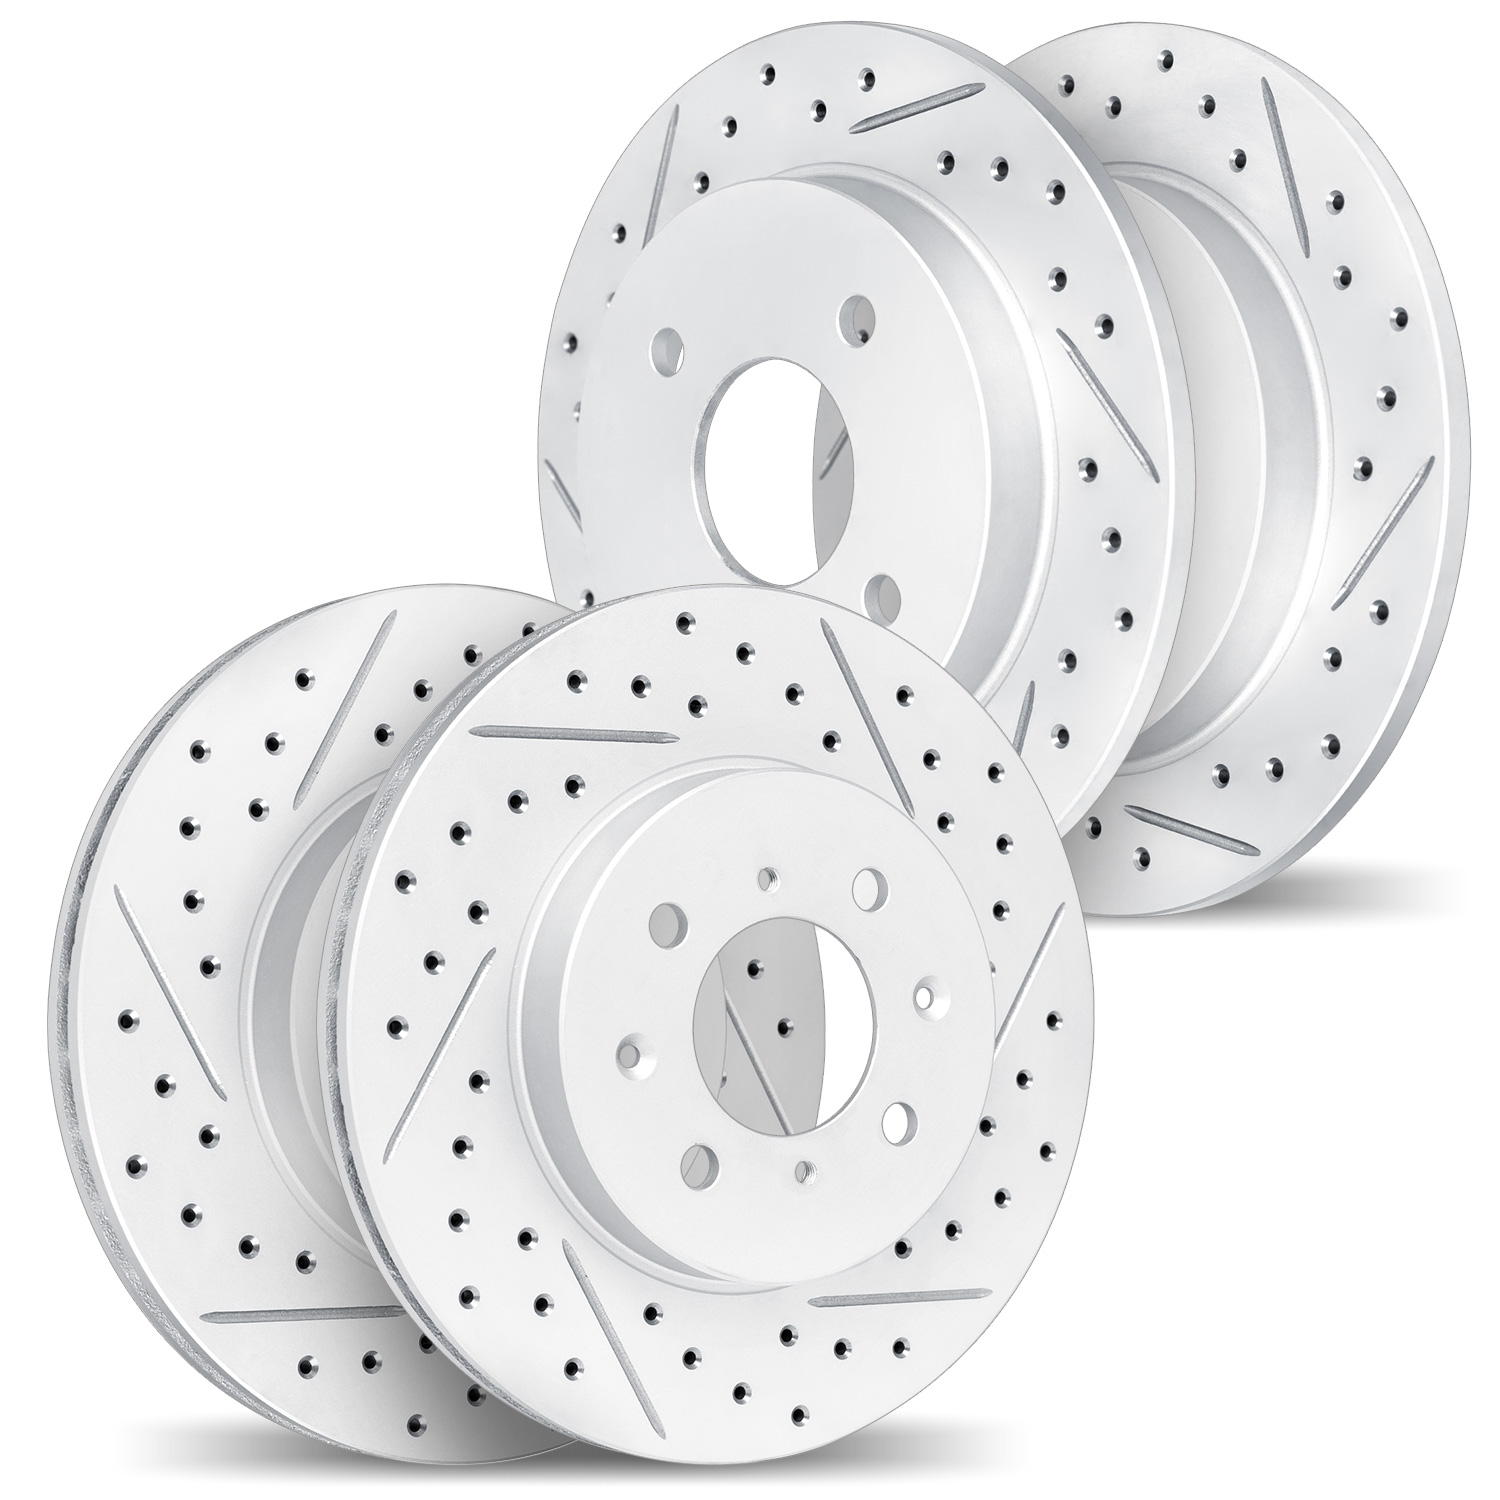 2004-74022 Geoperformance Drilled/Slotted Brake Rotors, 1986-2002 Audi/Volkswagen, Position: Front and Rear